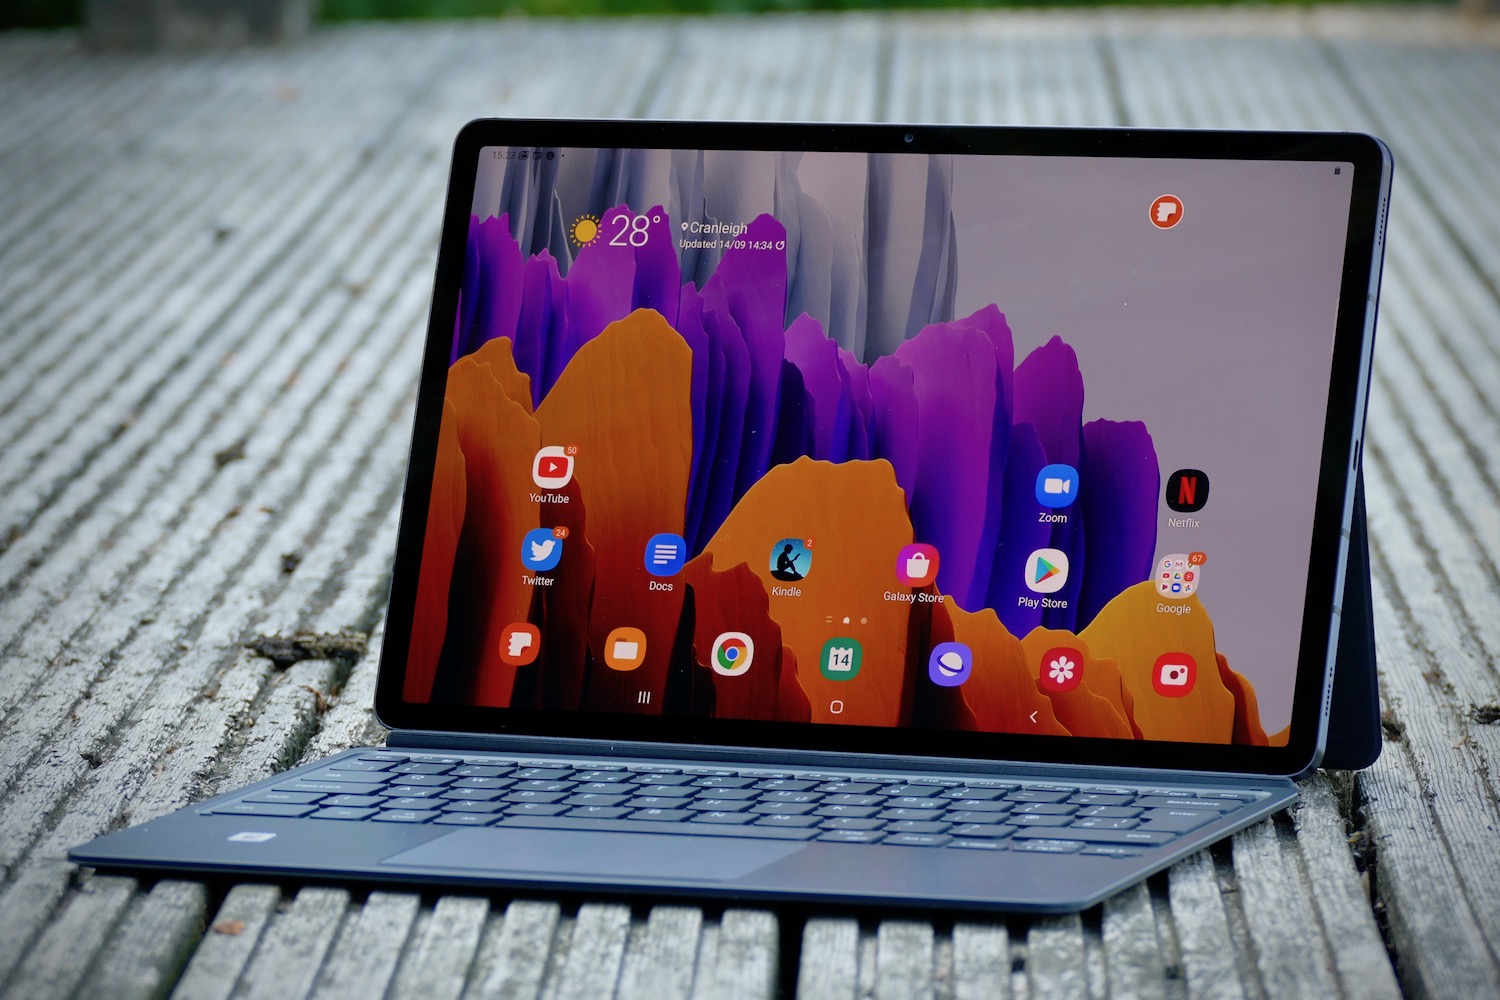 Samsung Galaxy Tab S7 FE review - underwhelming performance